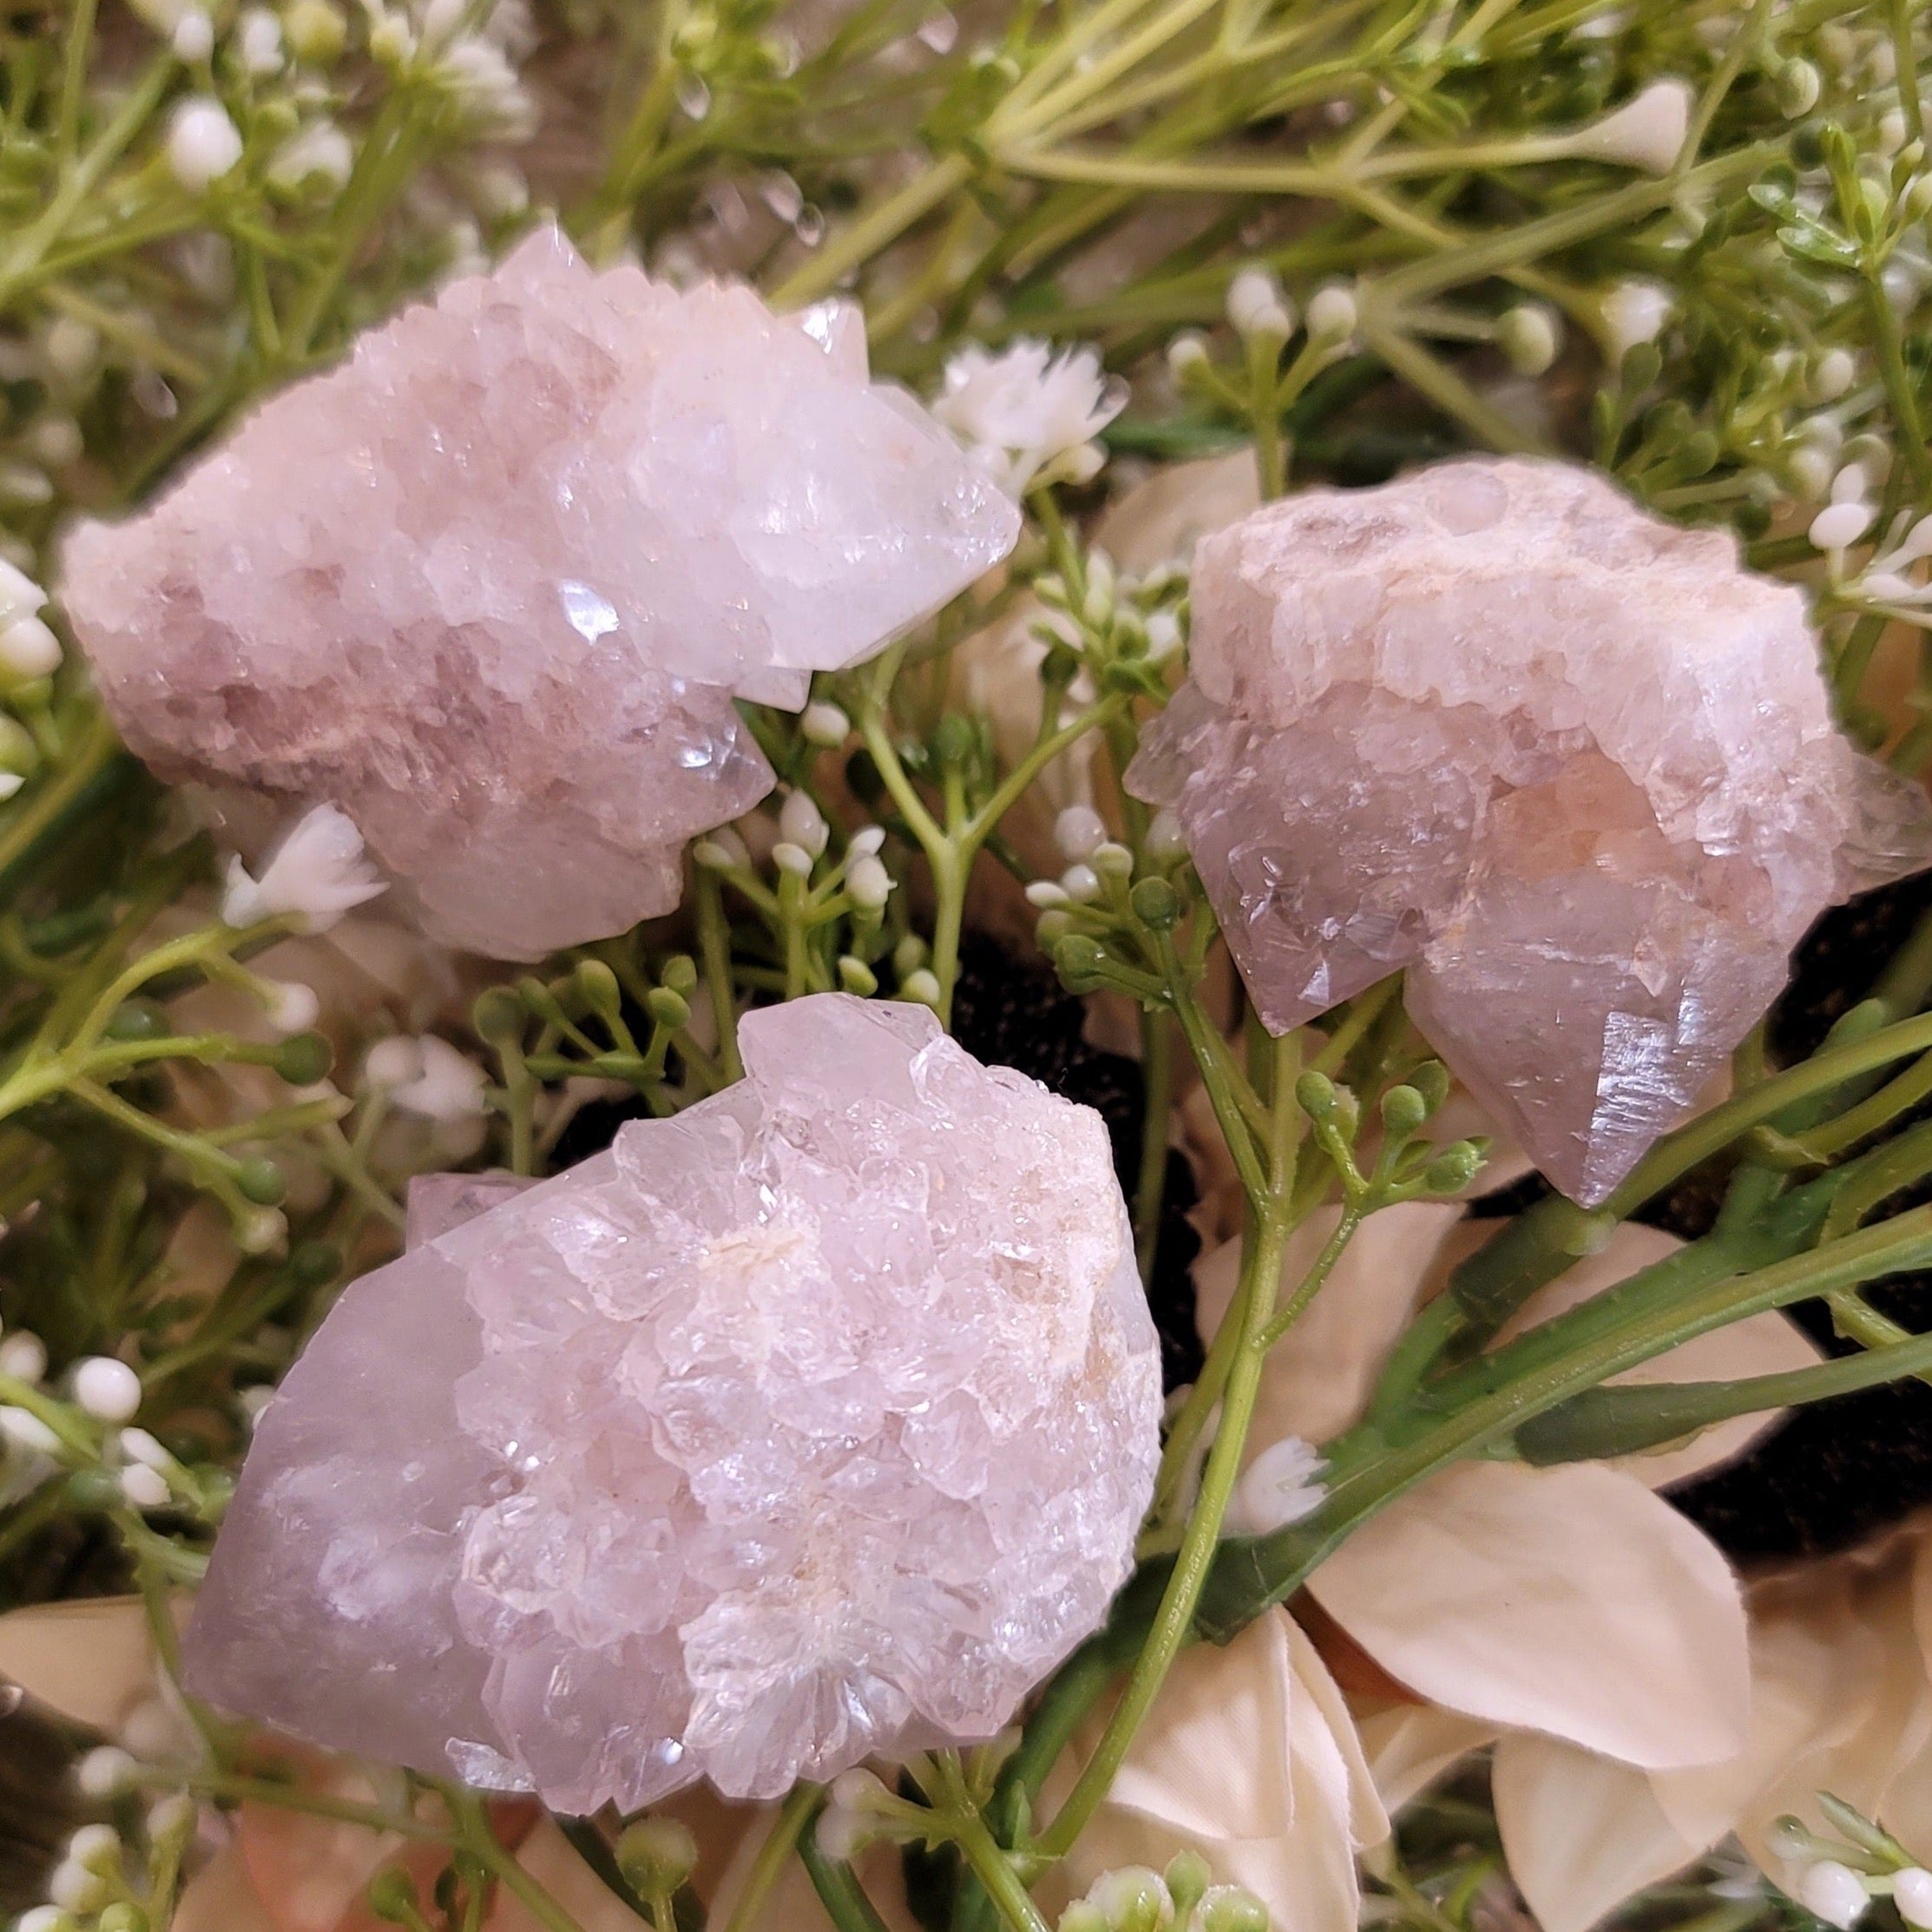 White Spirit Quartz Cluster for Harmony, Spiritual Alignment and Growth on Your Life Path